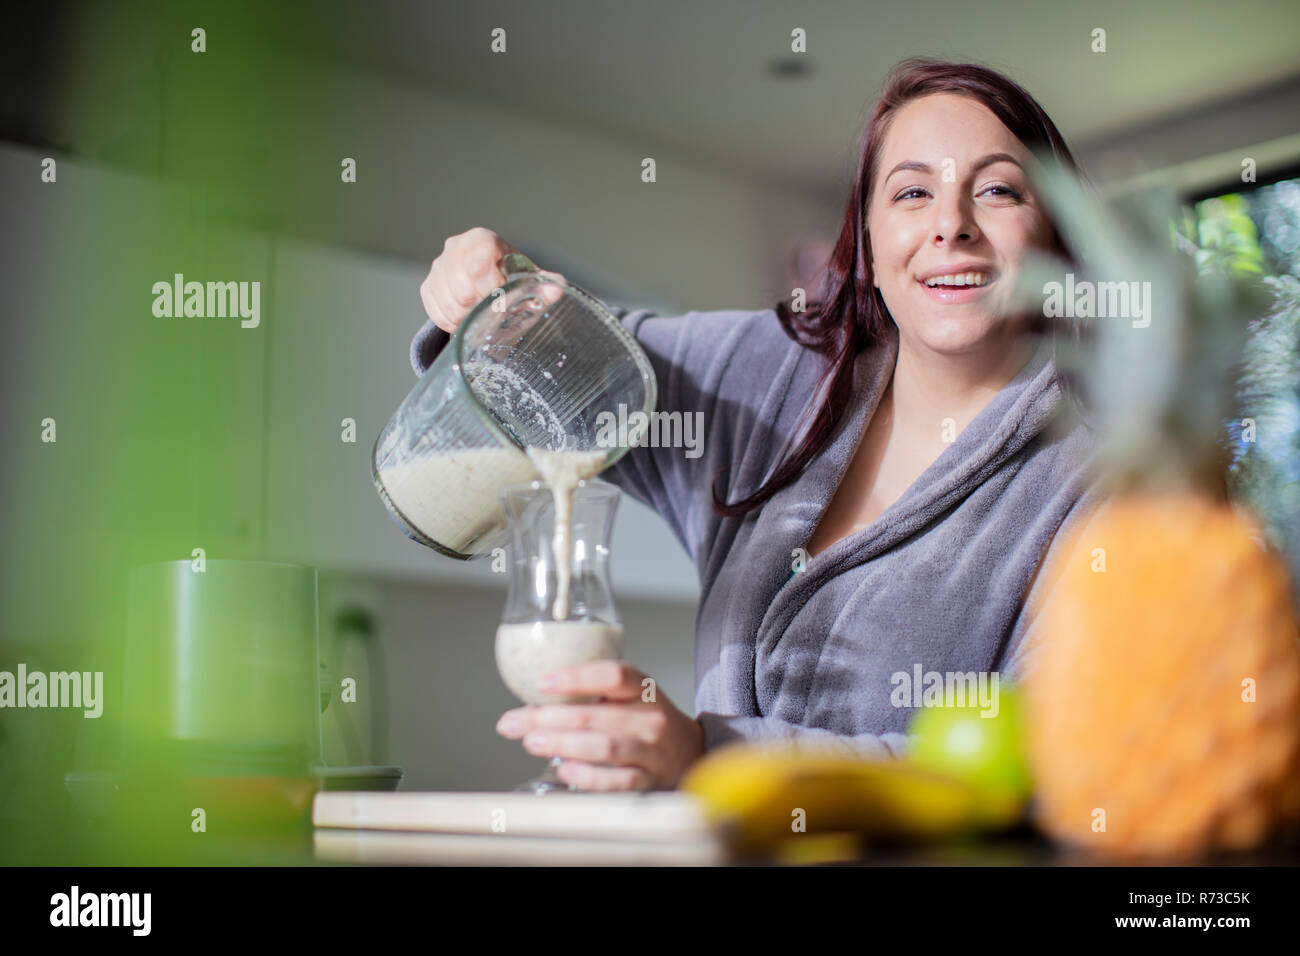 Woman having smoothie for breakfast at home Stock Photo